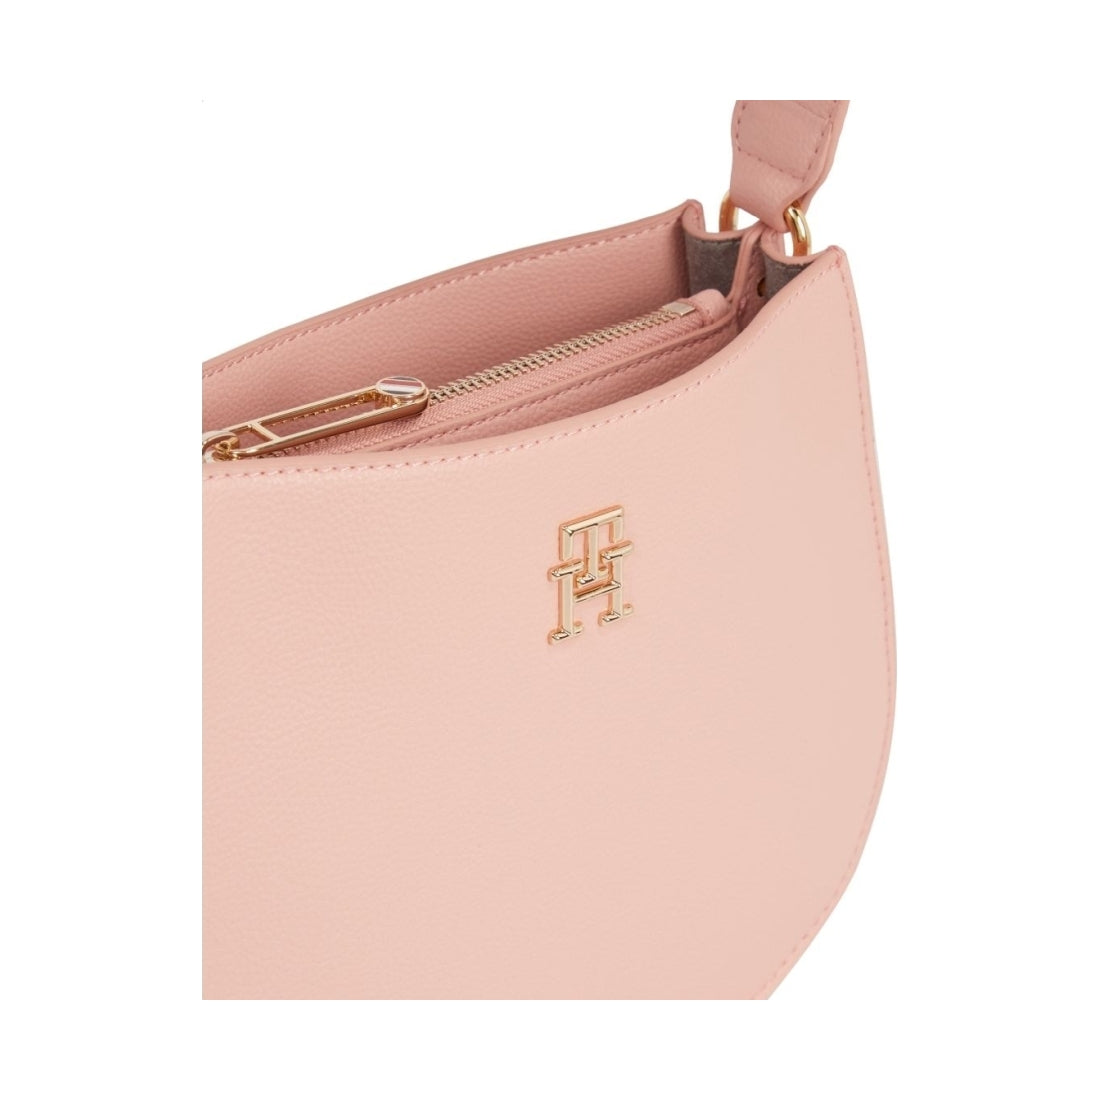 Tommy Hilfiger womens soothing pink life crossover | Vilbury London